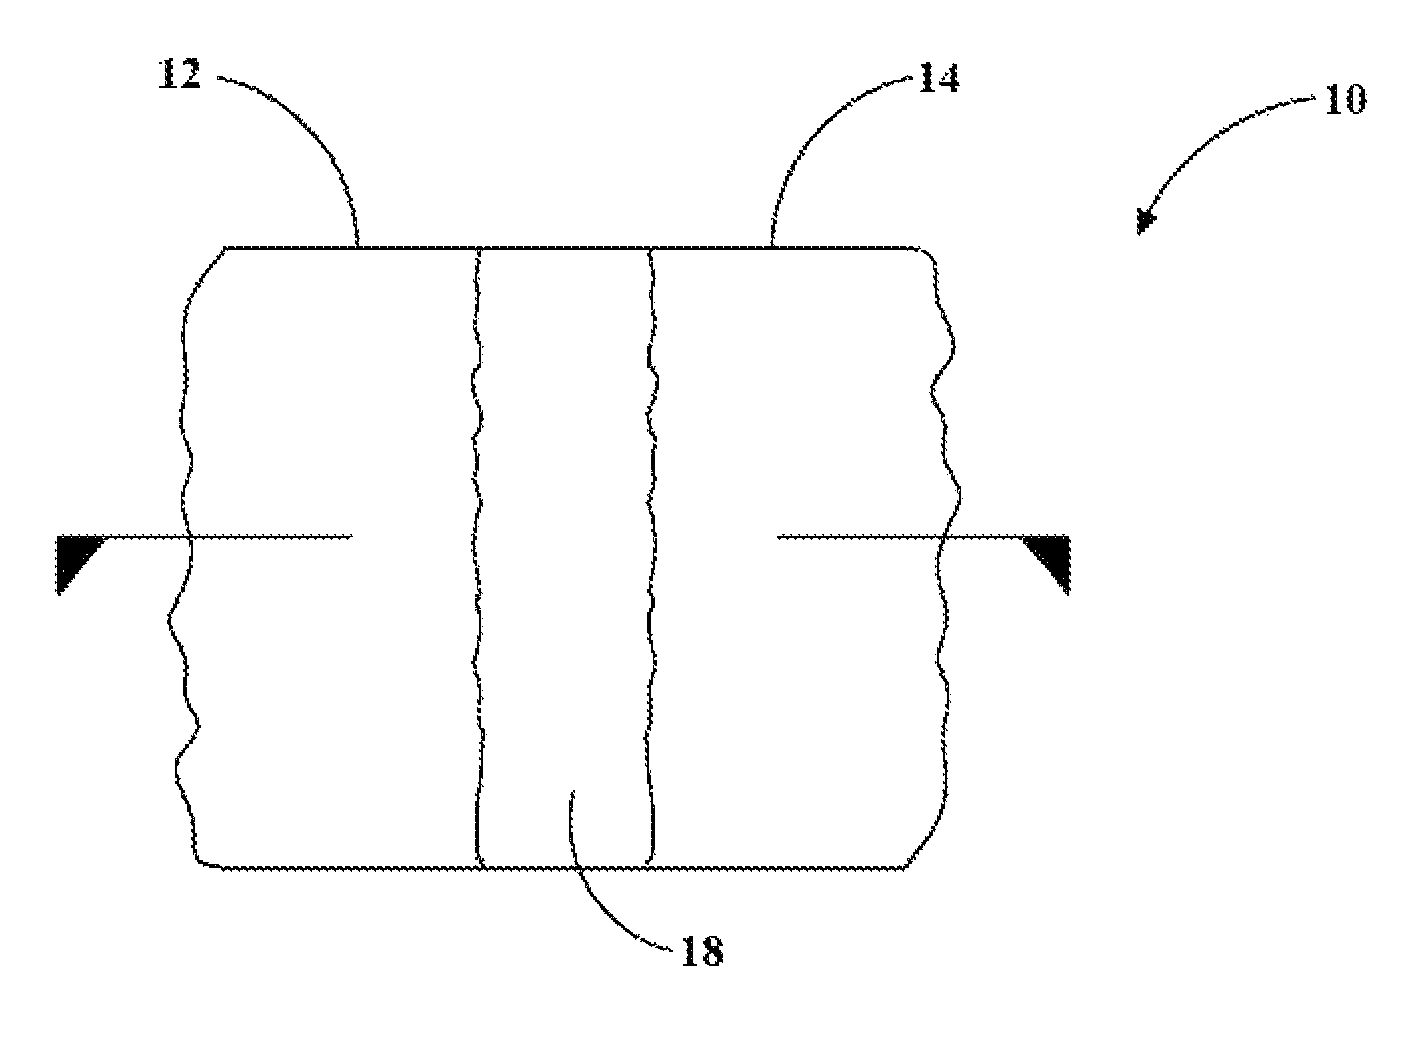 Structure and method of bonding copper and aluminum